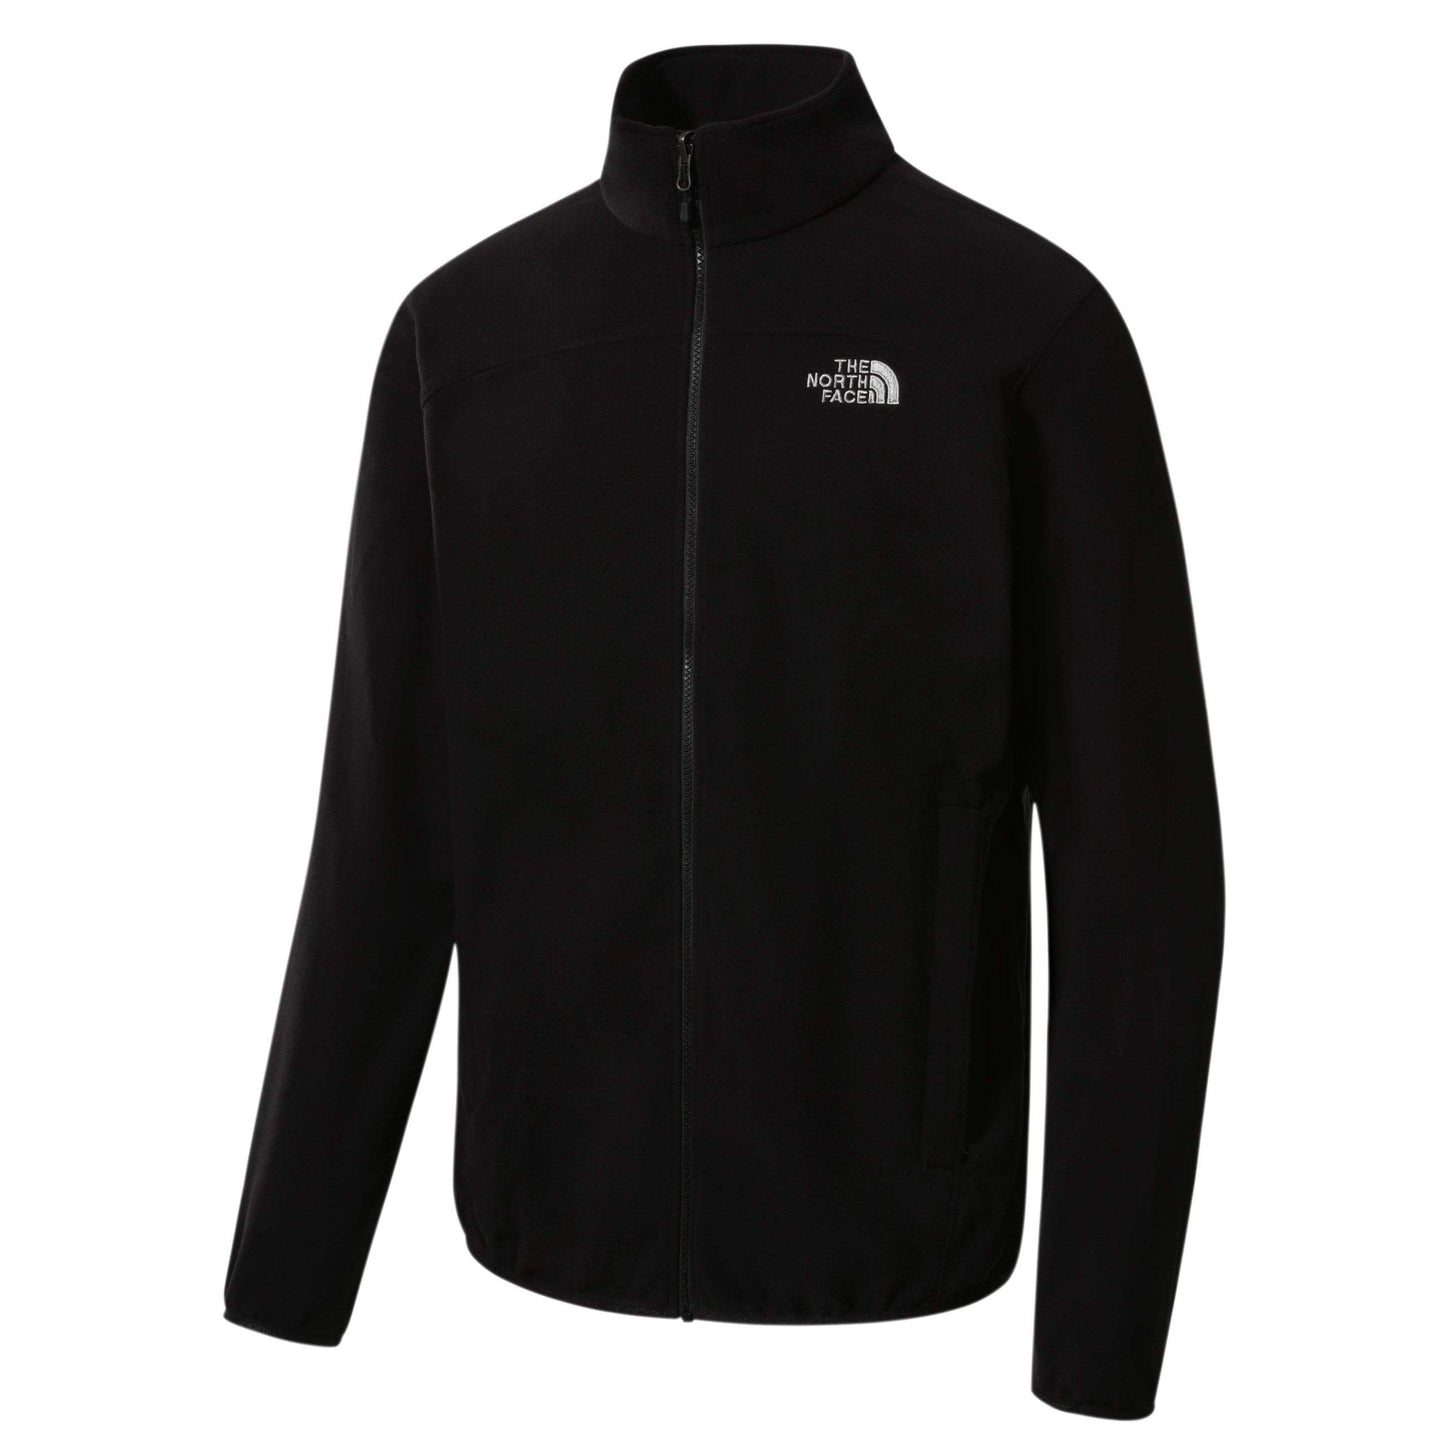 Men’s Evolve II Triclimate Jacket by The North Face